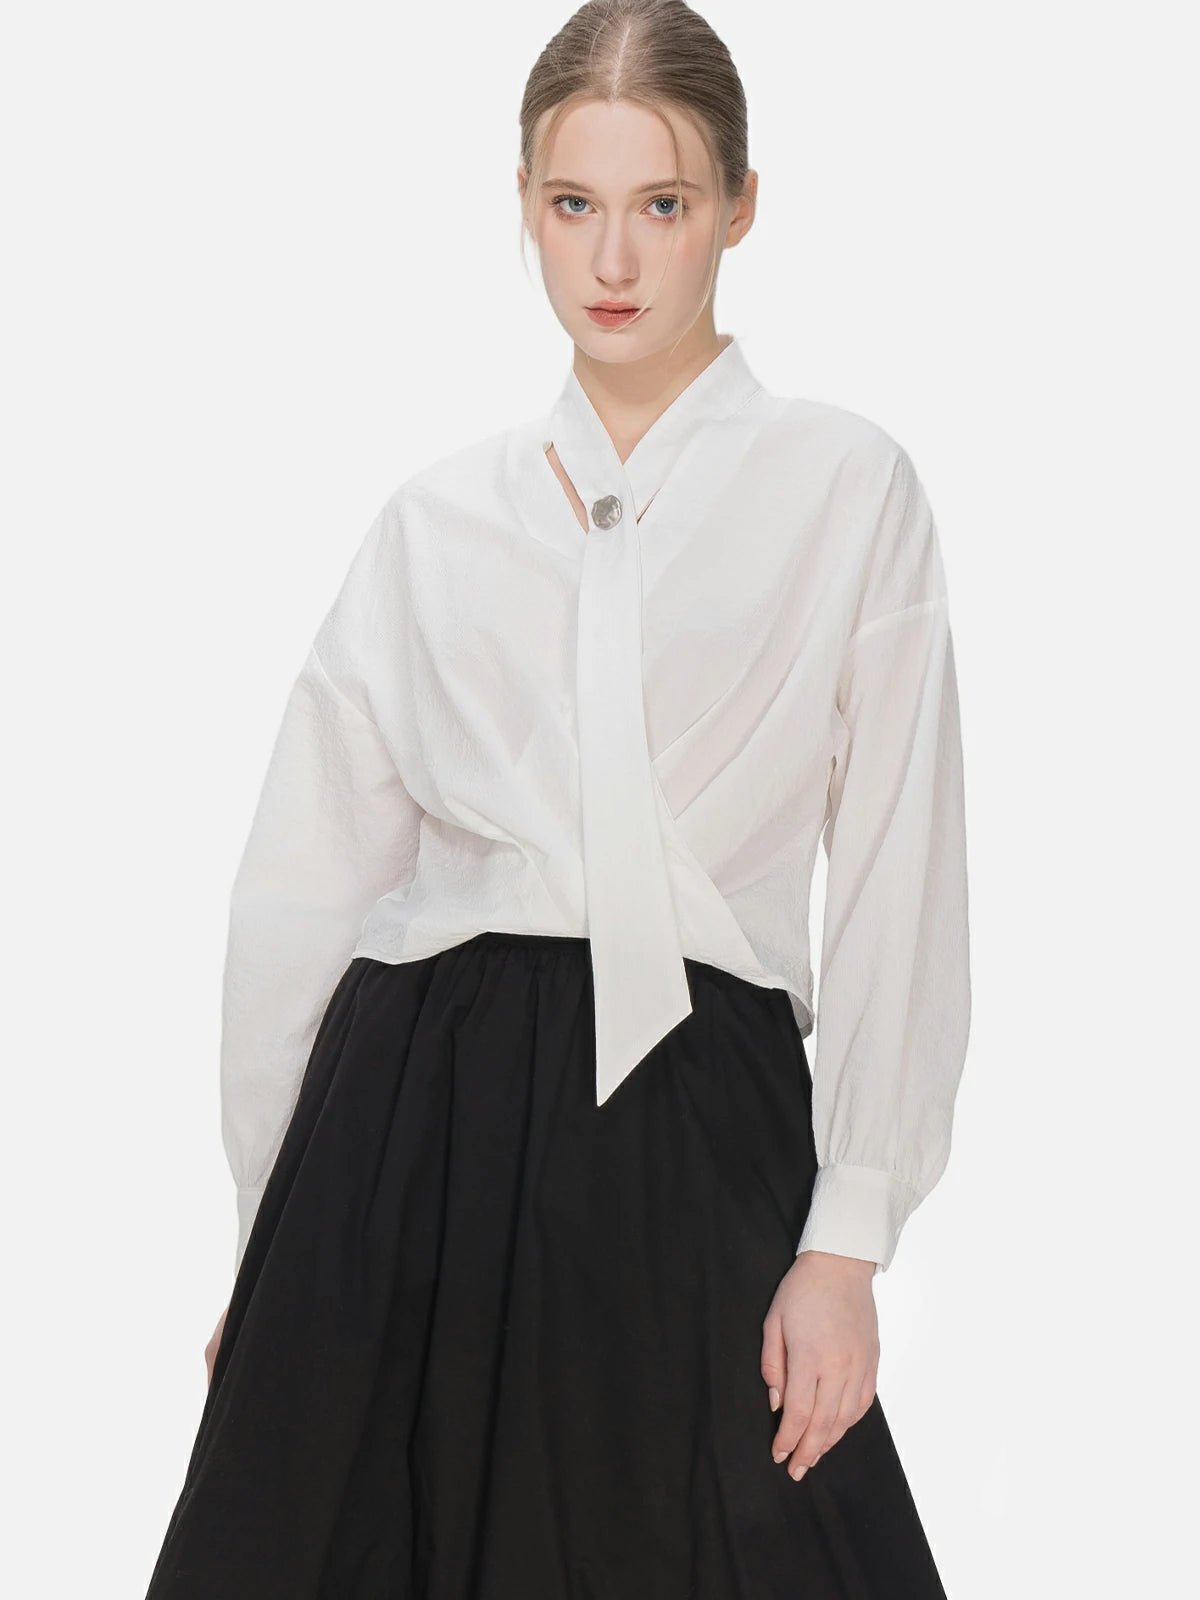 Stylish V-neck blouse with cascading ribbons, featuring a modern and elegant cross-pleat design for a uniquely charming appearance.